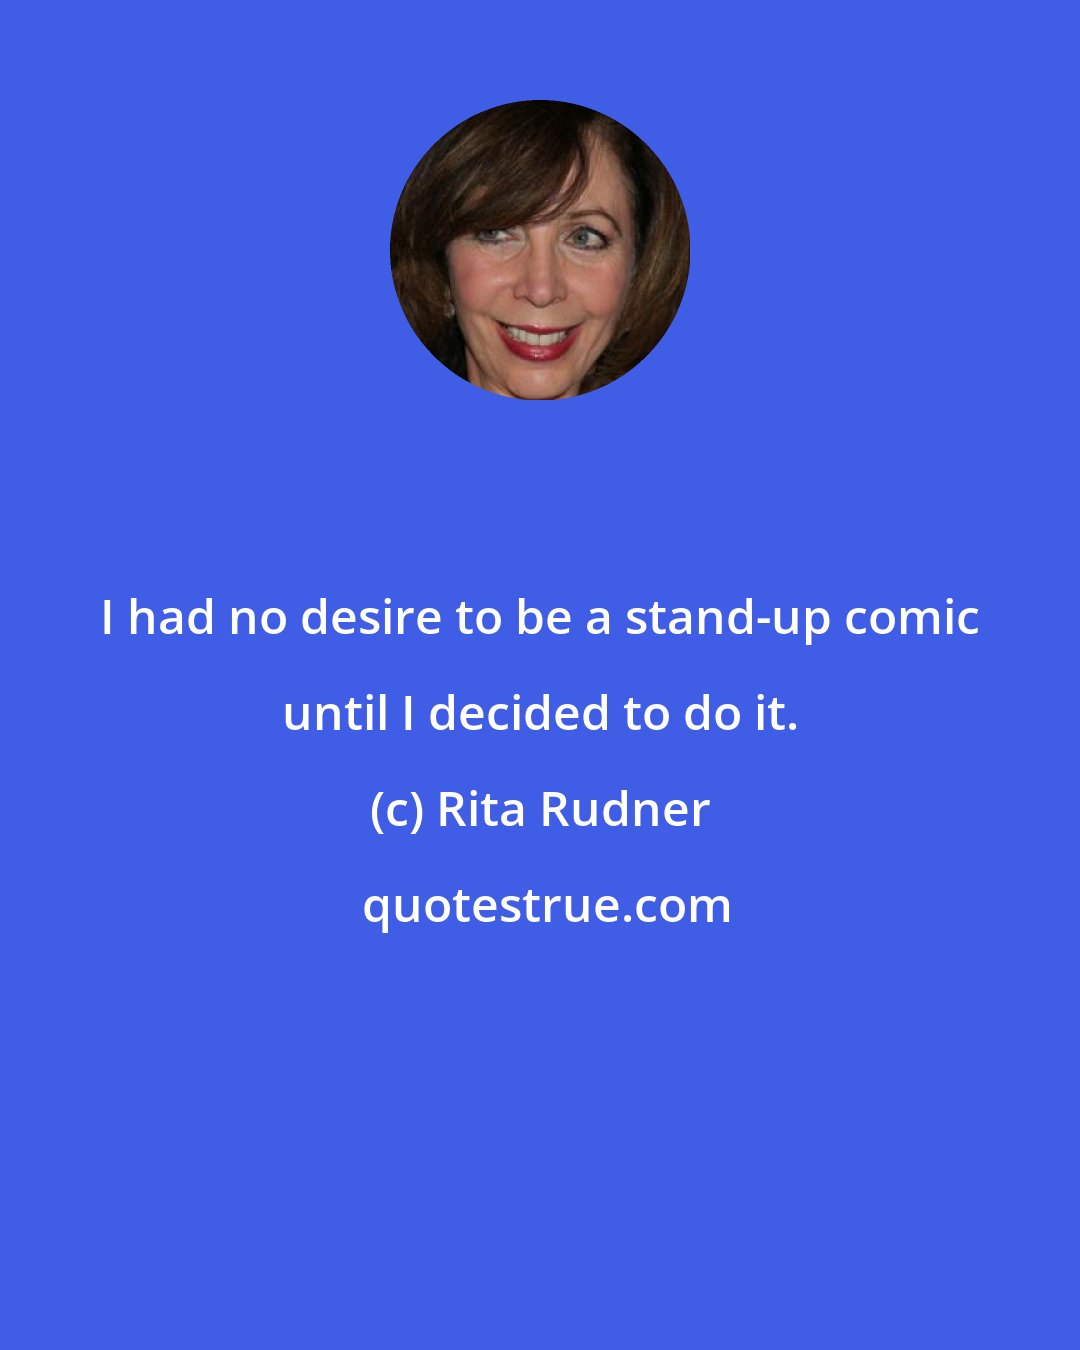 Rita Rudner: I had no desire to be a stand-up comic until I decided to do it.